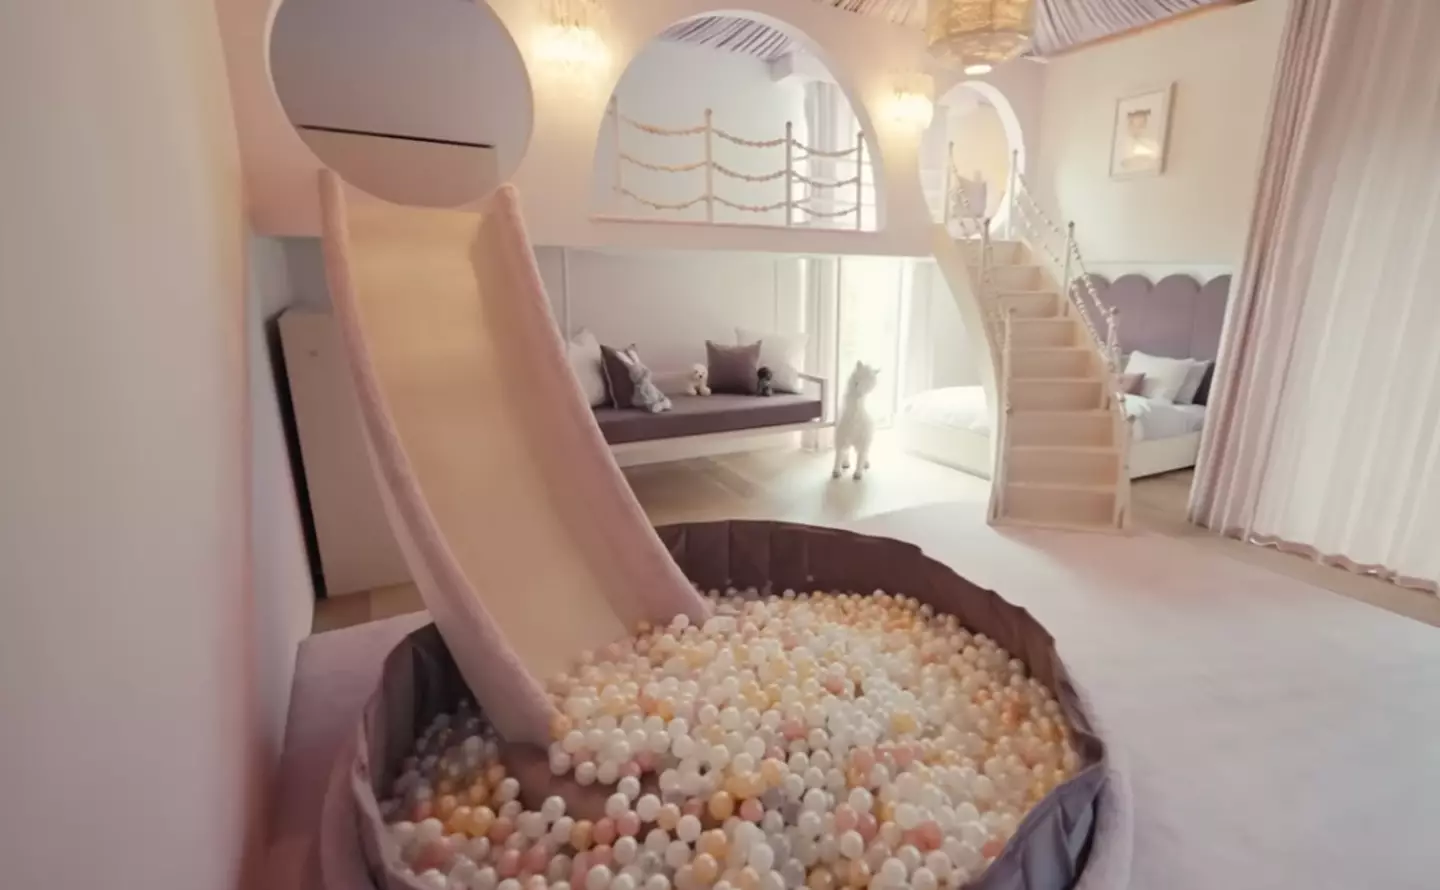 There’s also a slide leading to a ball pit - because what kid wouldn’t want that?